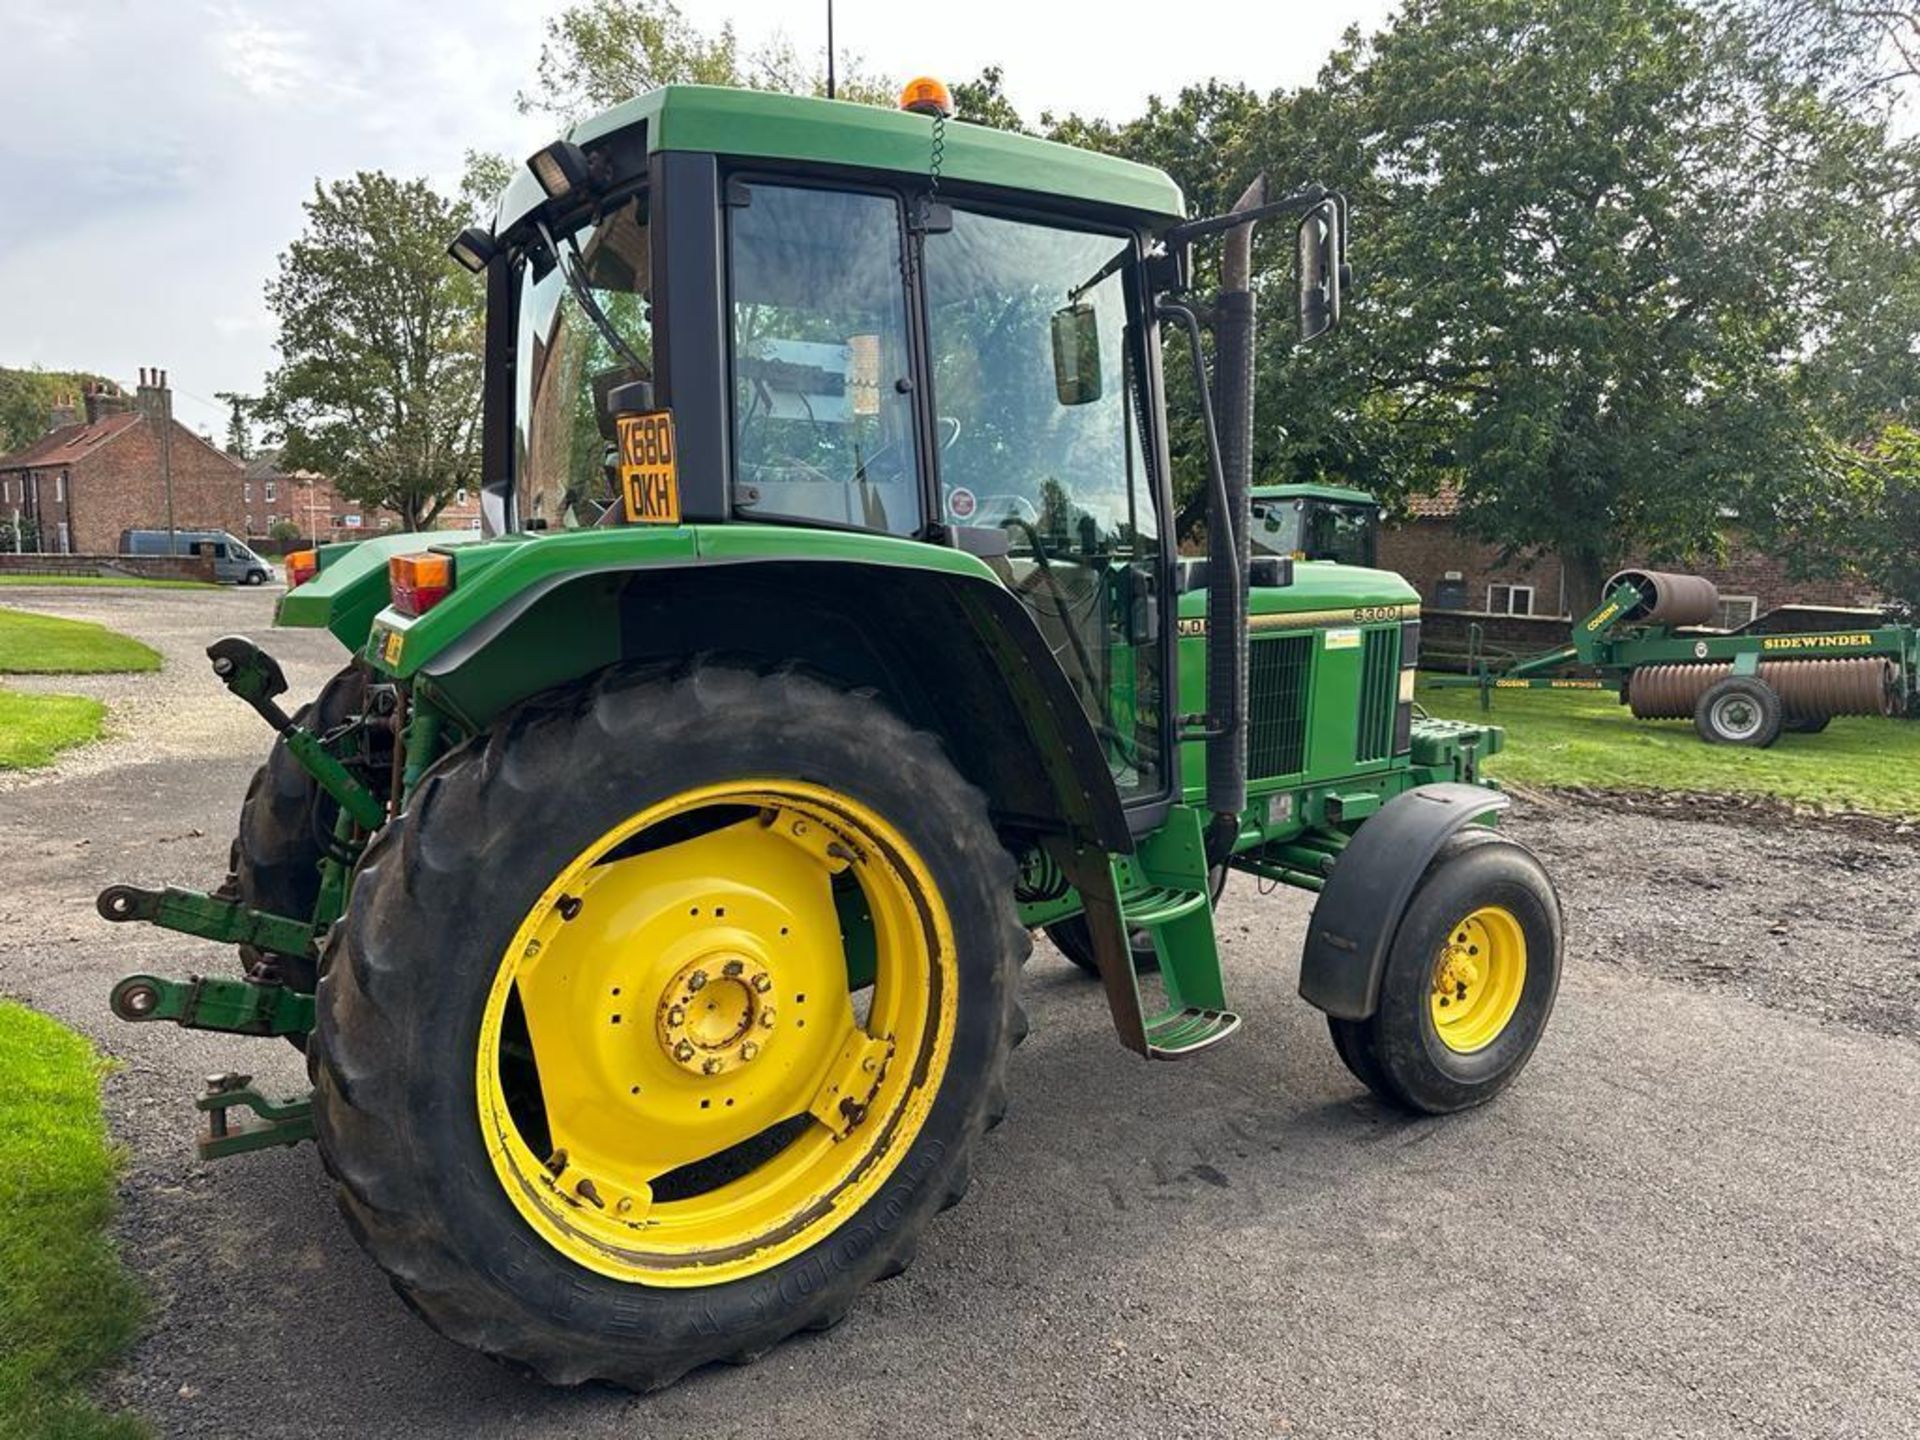 1993 John Deere 6300 Power Quad tractor on 10.0-16 front and 13.6r38 rear wheels and tyres. On farm - Image 5 of 17